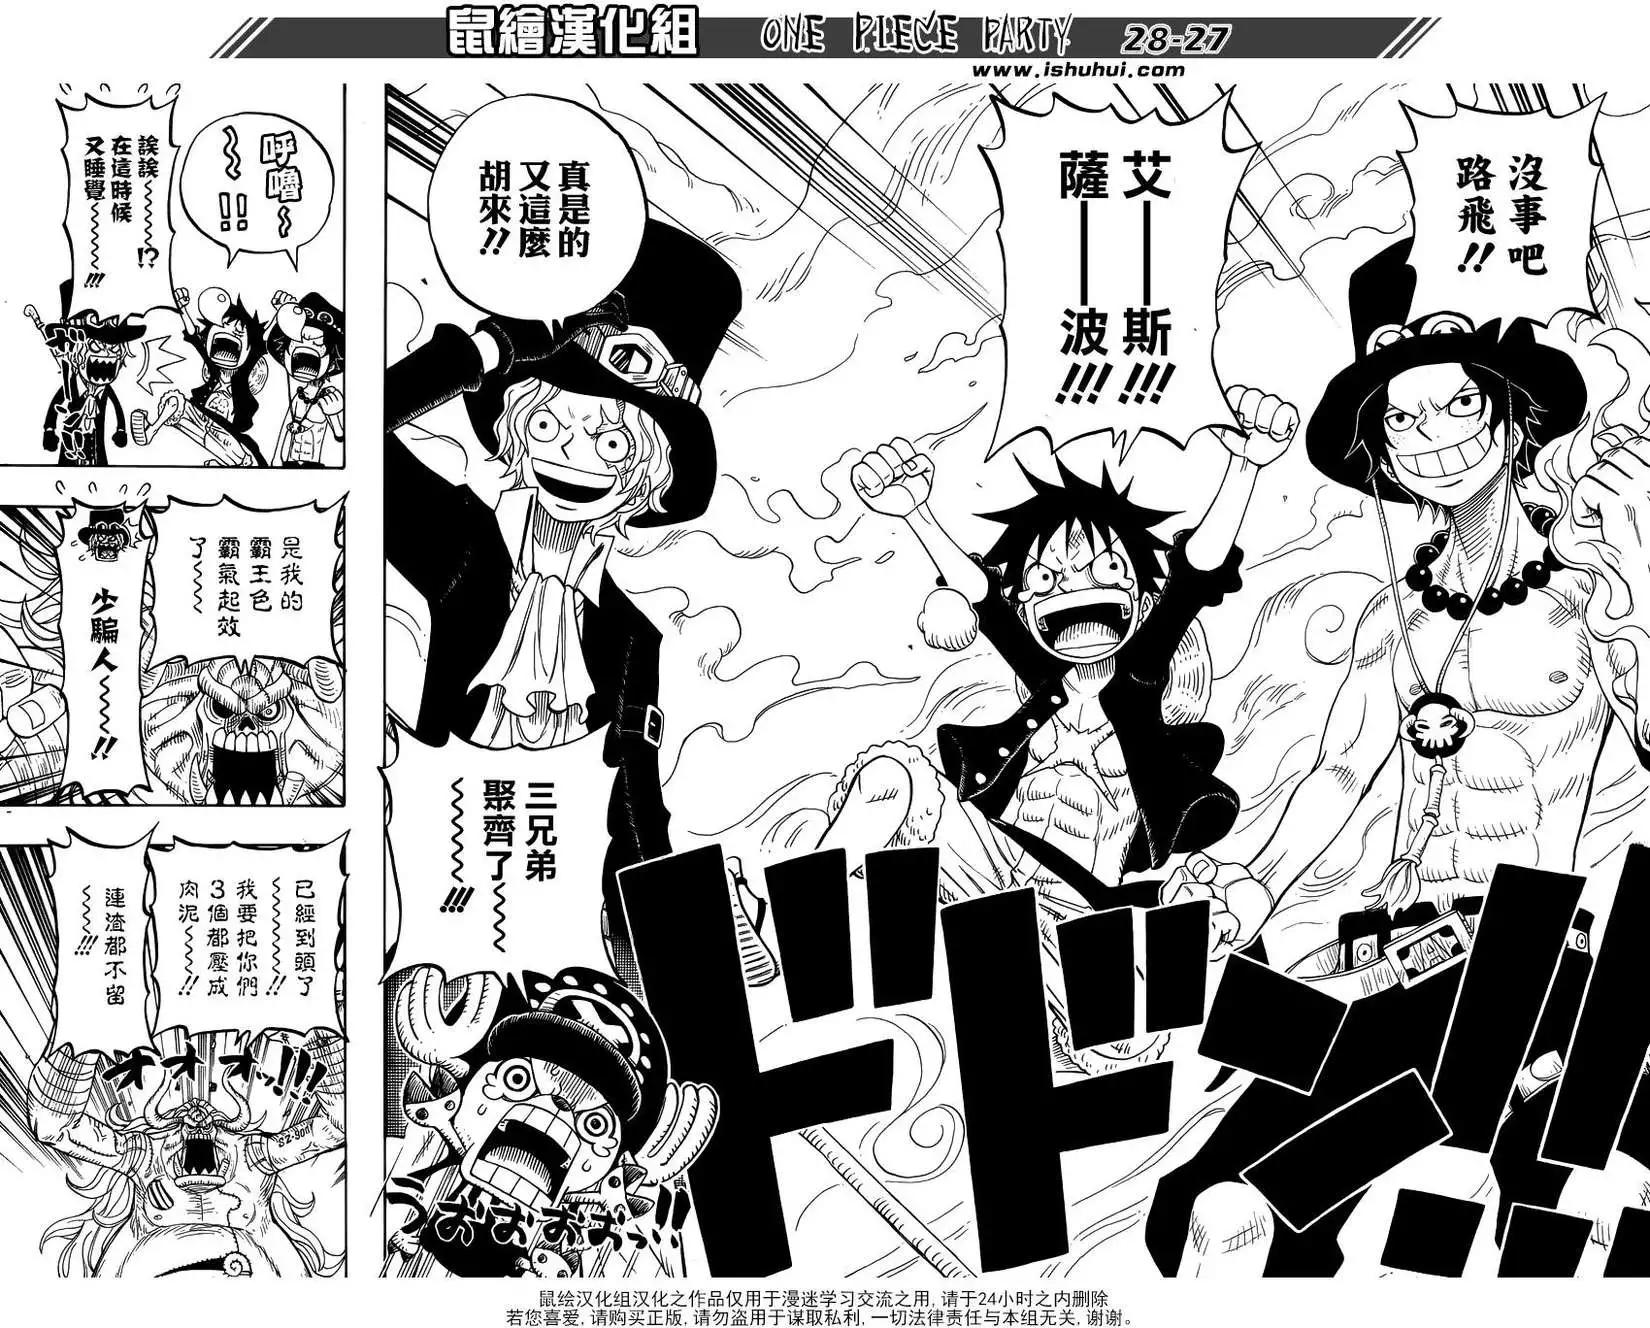 One piece party - 第03回 - 1